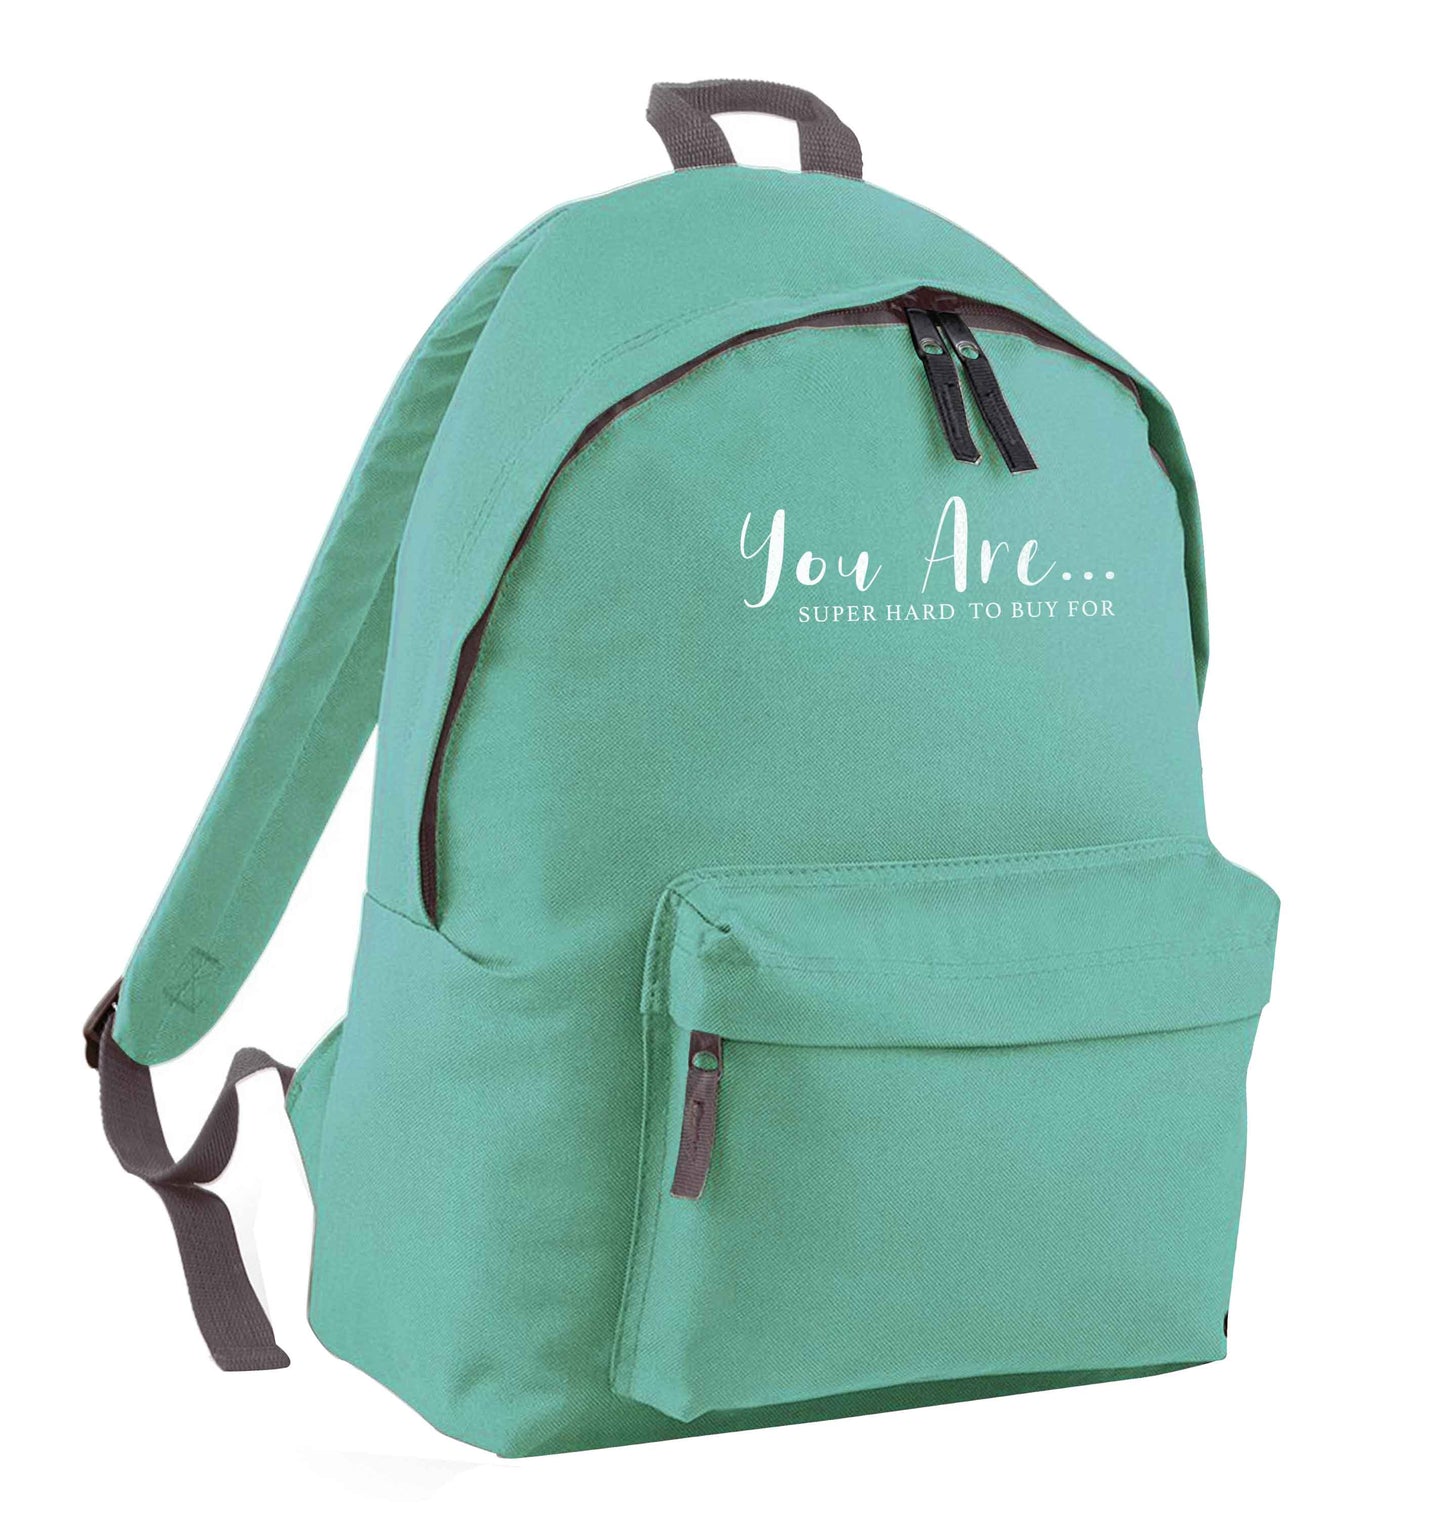 You are super hard to buy for mint adults backpack